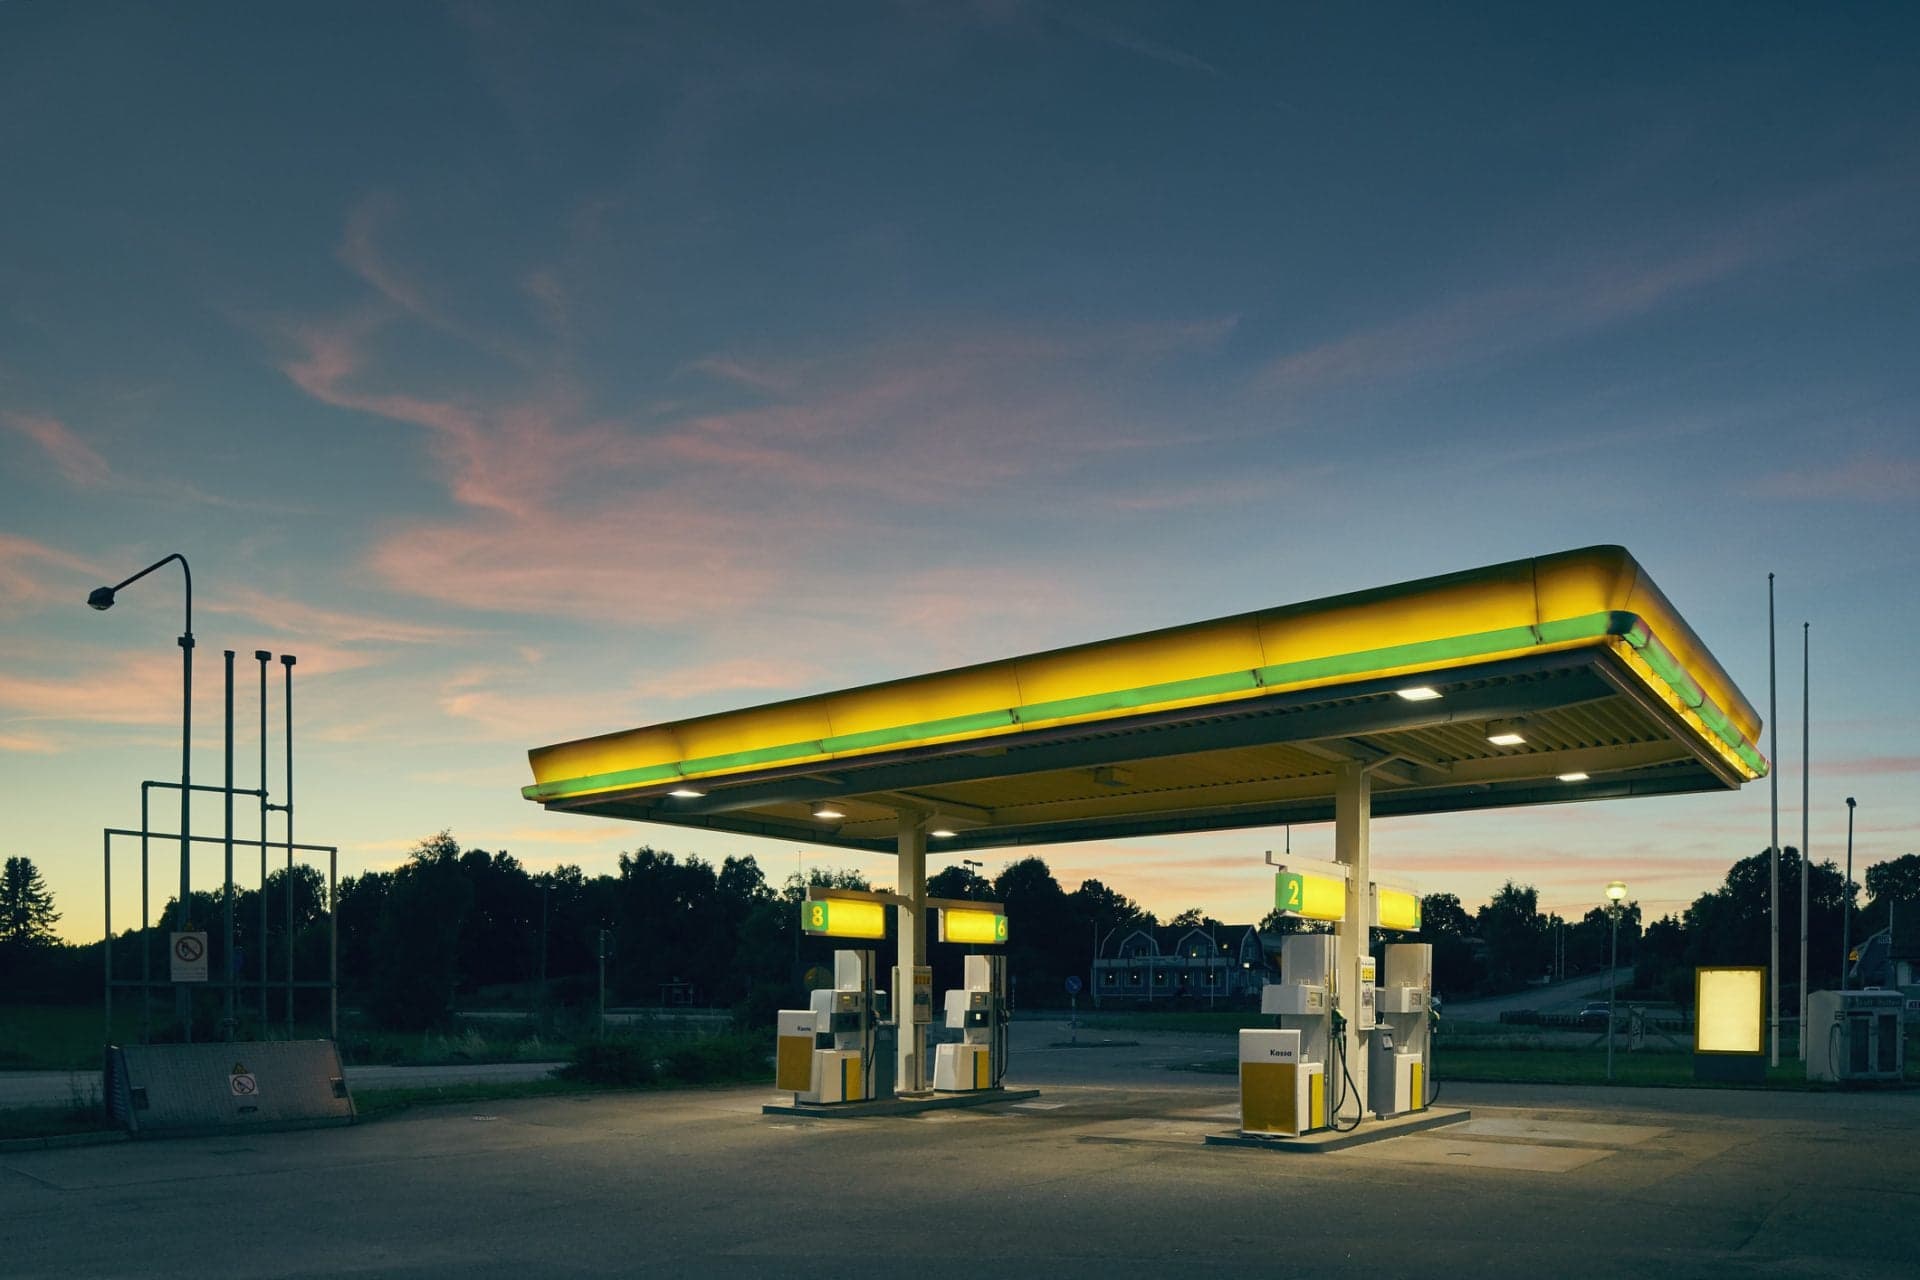 UK Gas Stations Face Closure Over Low Demand. Are US Stations Next?